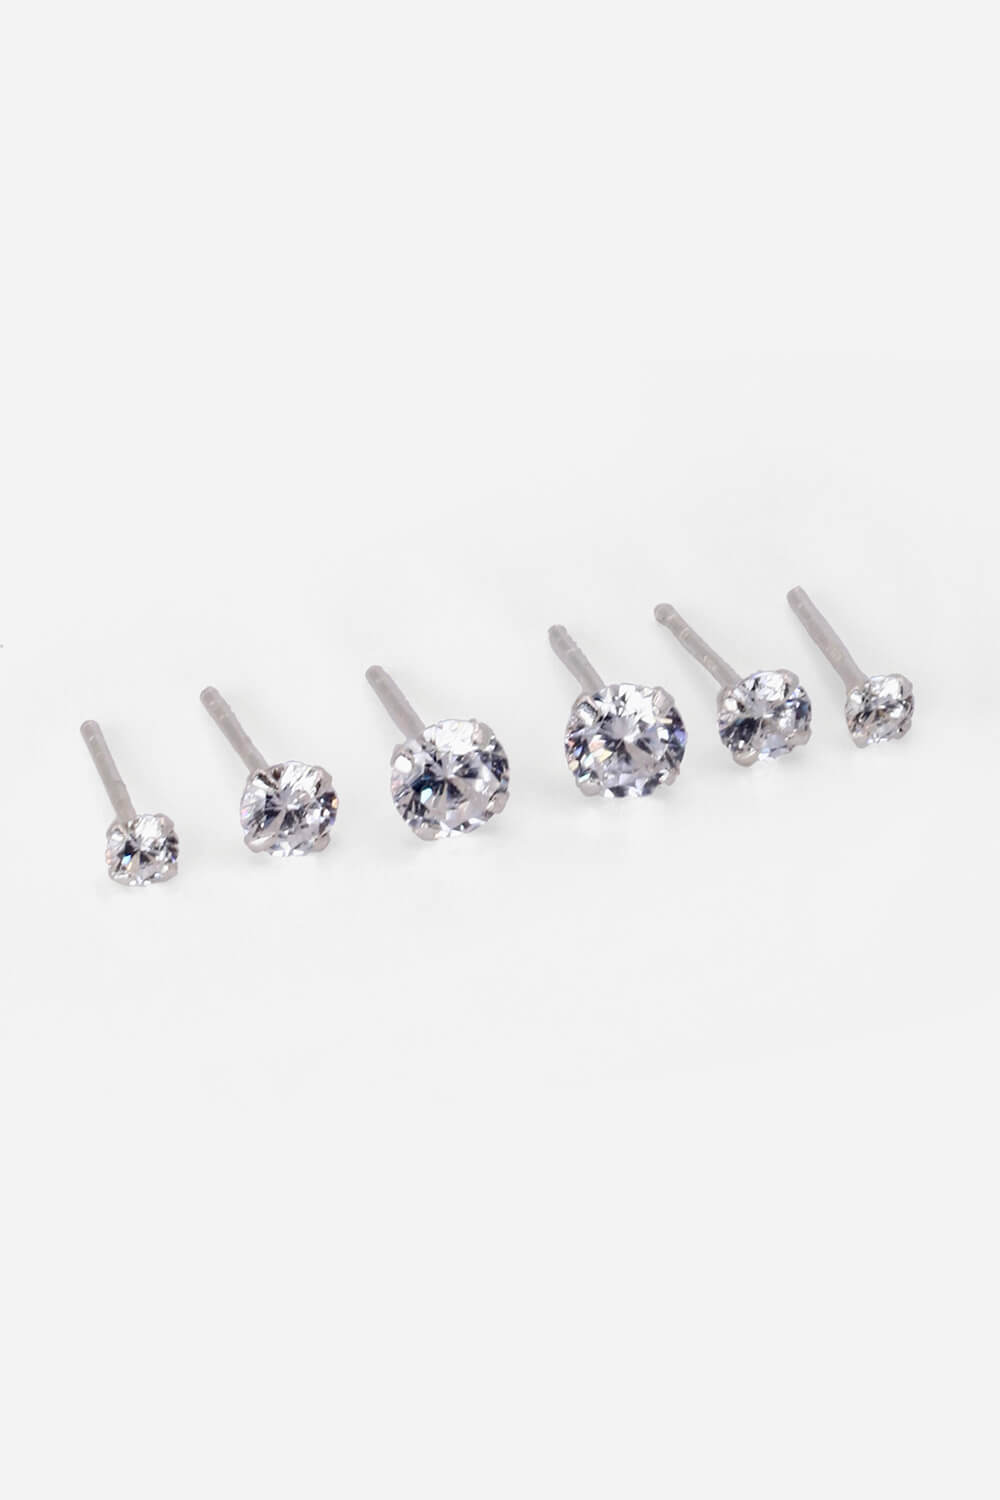 Sterling Silver Cubic Zirconia Stud Earring Set , Image 3 of 4